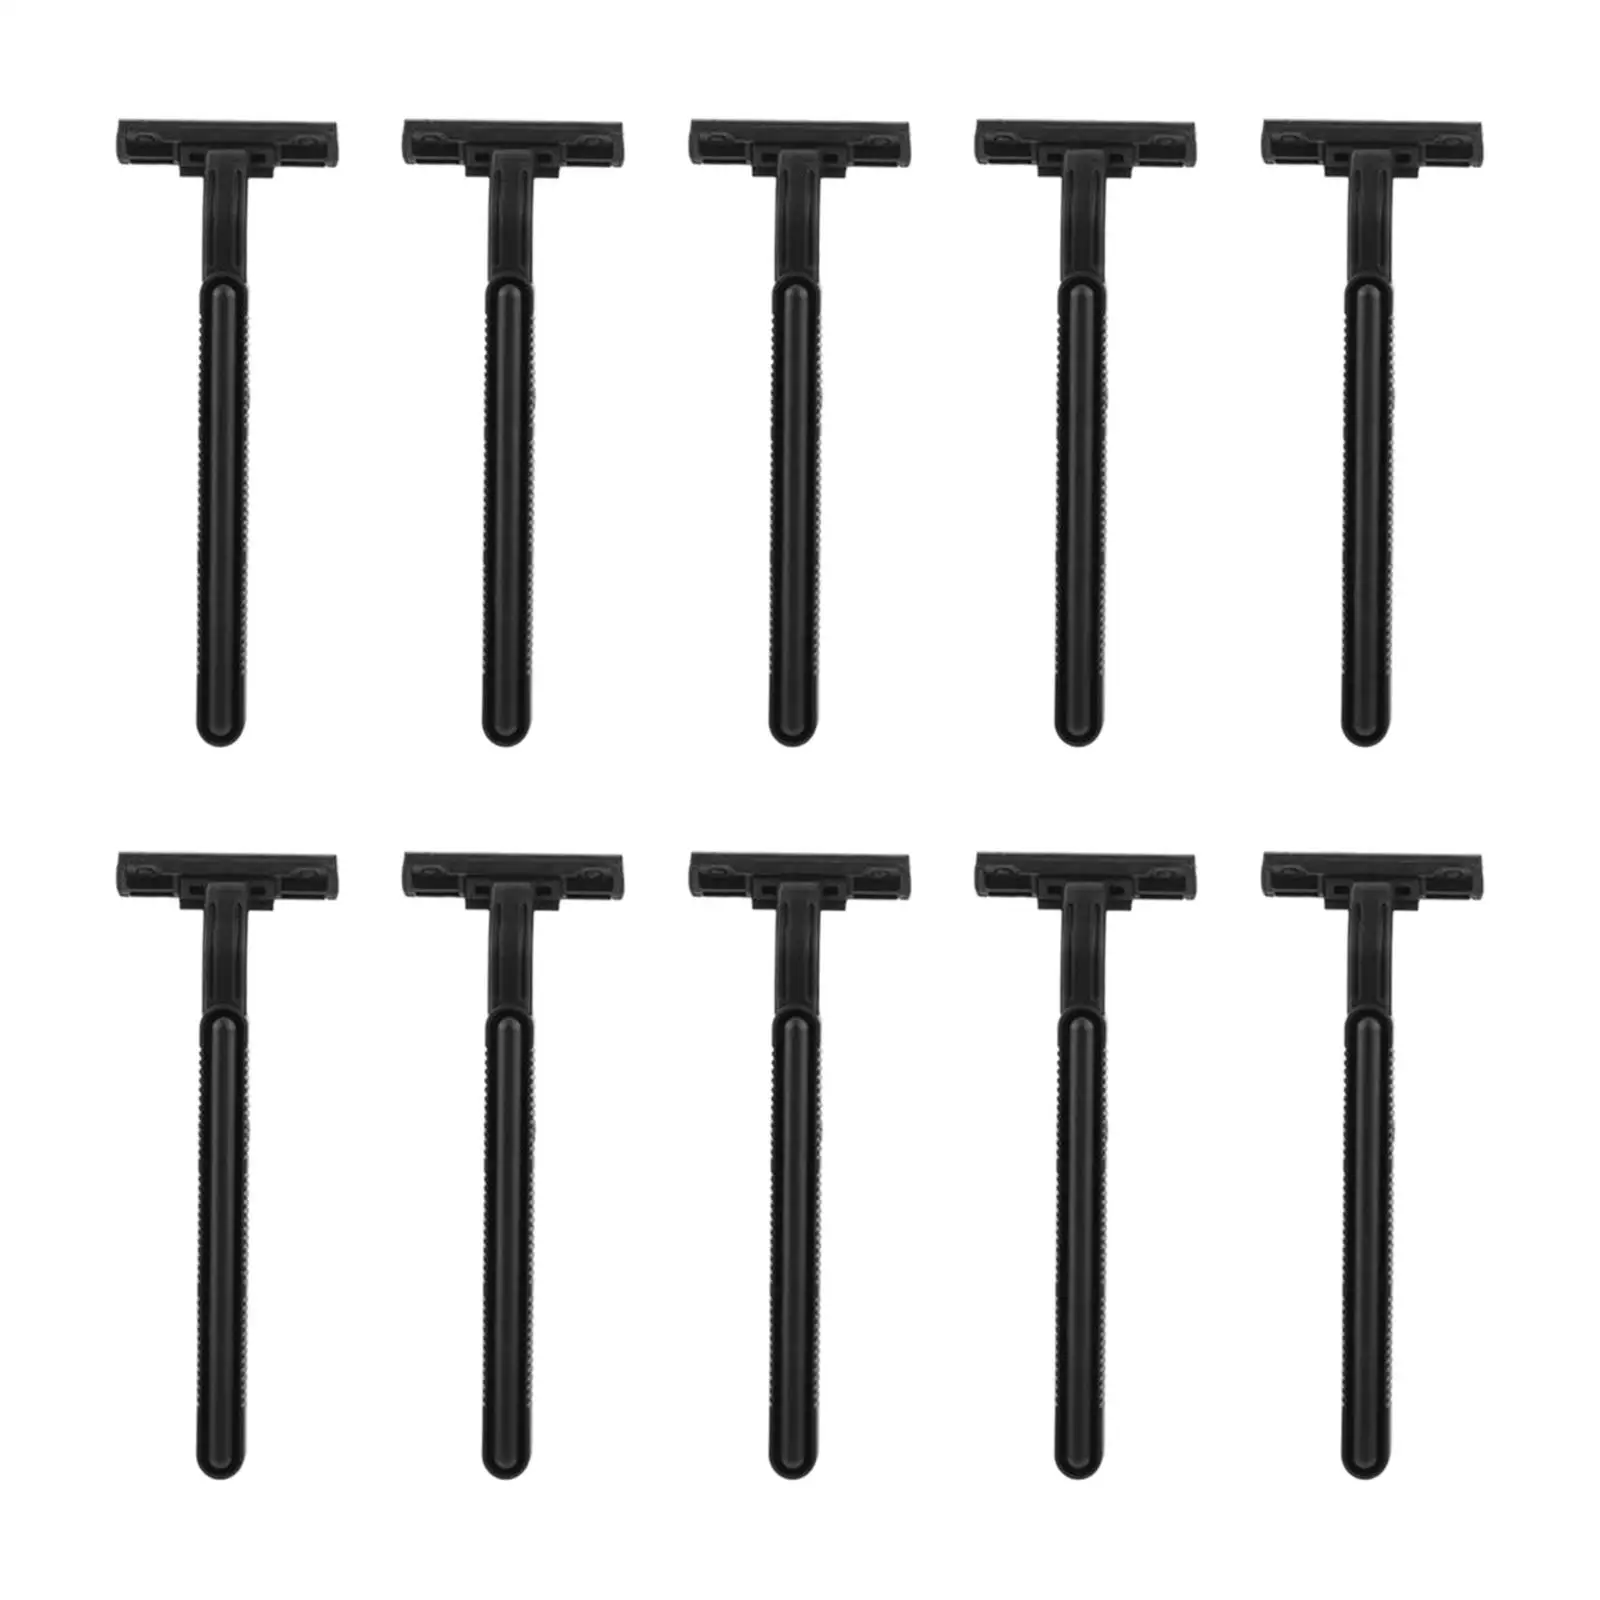 10Pcs Disposable Shaver Shaving Grooming Tool Beard Shaver for Travel Male Home Use